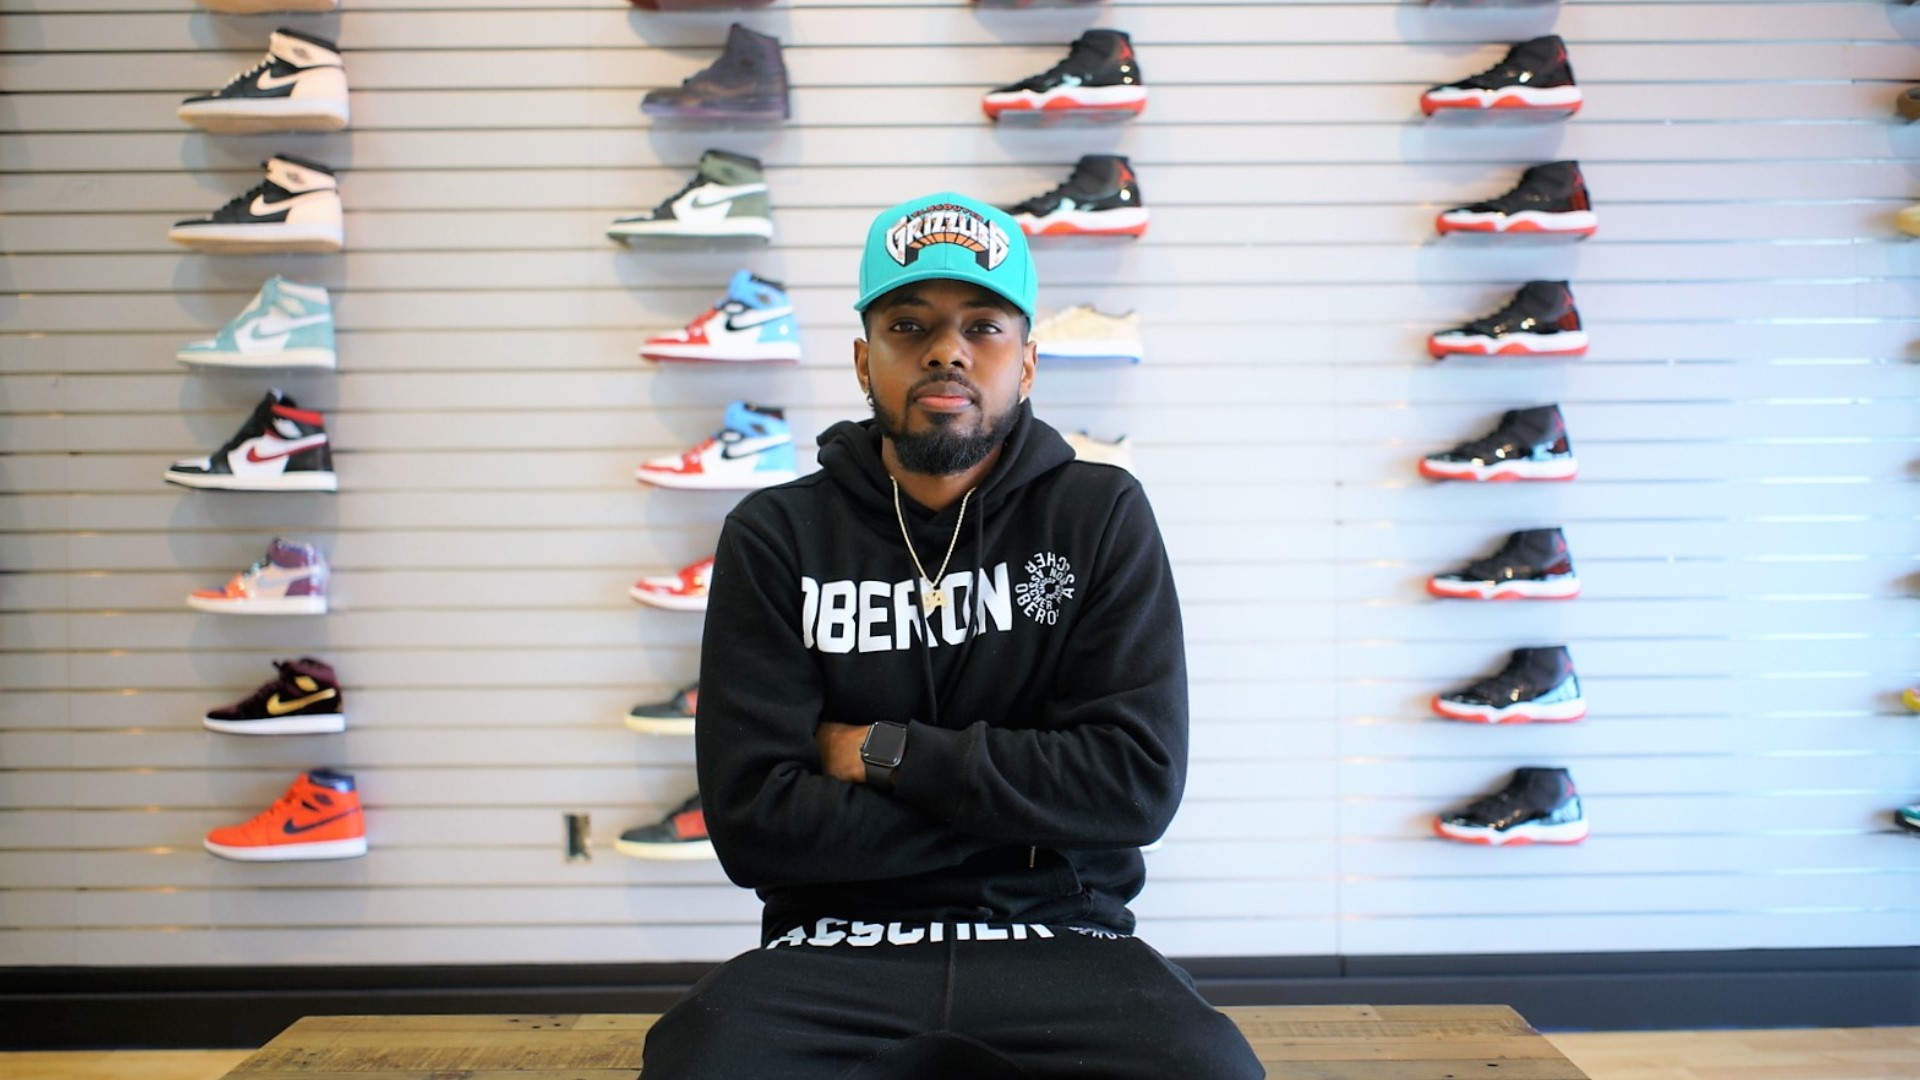 About three years ago, Aaron Davis camped outside of an Atlanta shoe store for 15 hours, waiting for a sneaker release. Now, he owns his own shoe store in Macon.